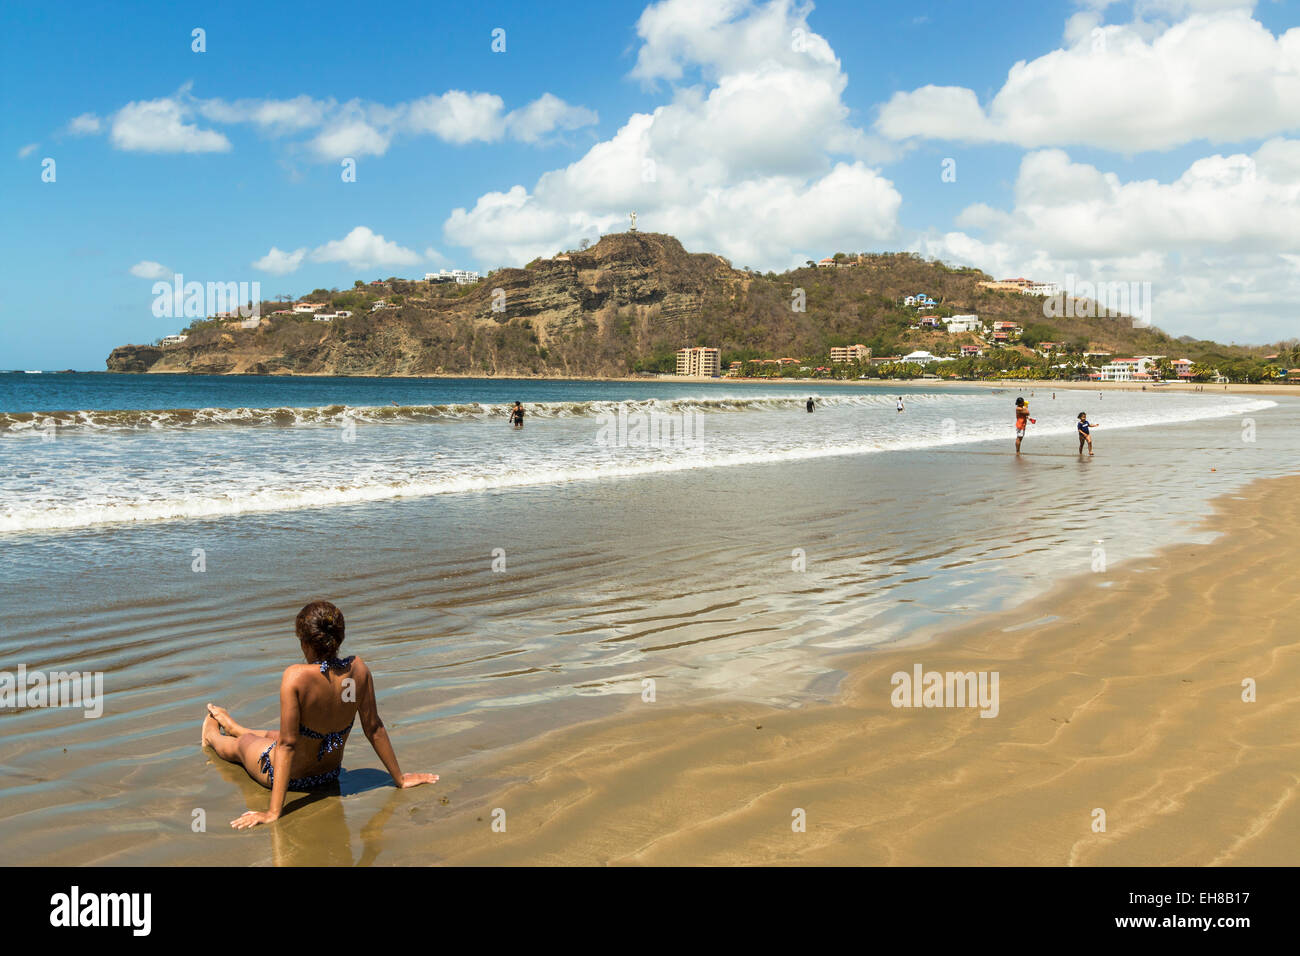 Lookout hill overlooking the beach at this popular tourist hub for the southern surf coast, San Juan del Sur, Rivas, Nicaragua Stock Photo